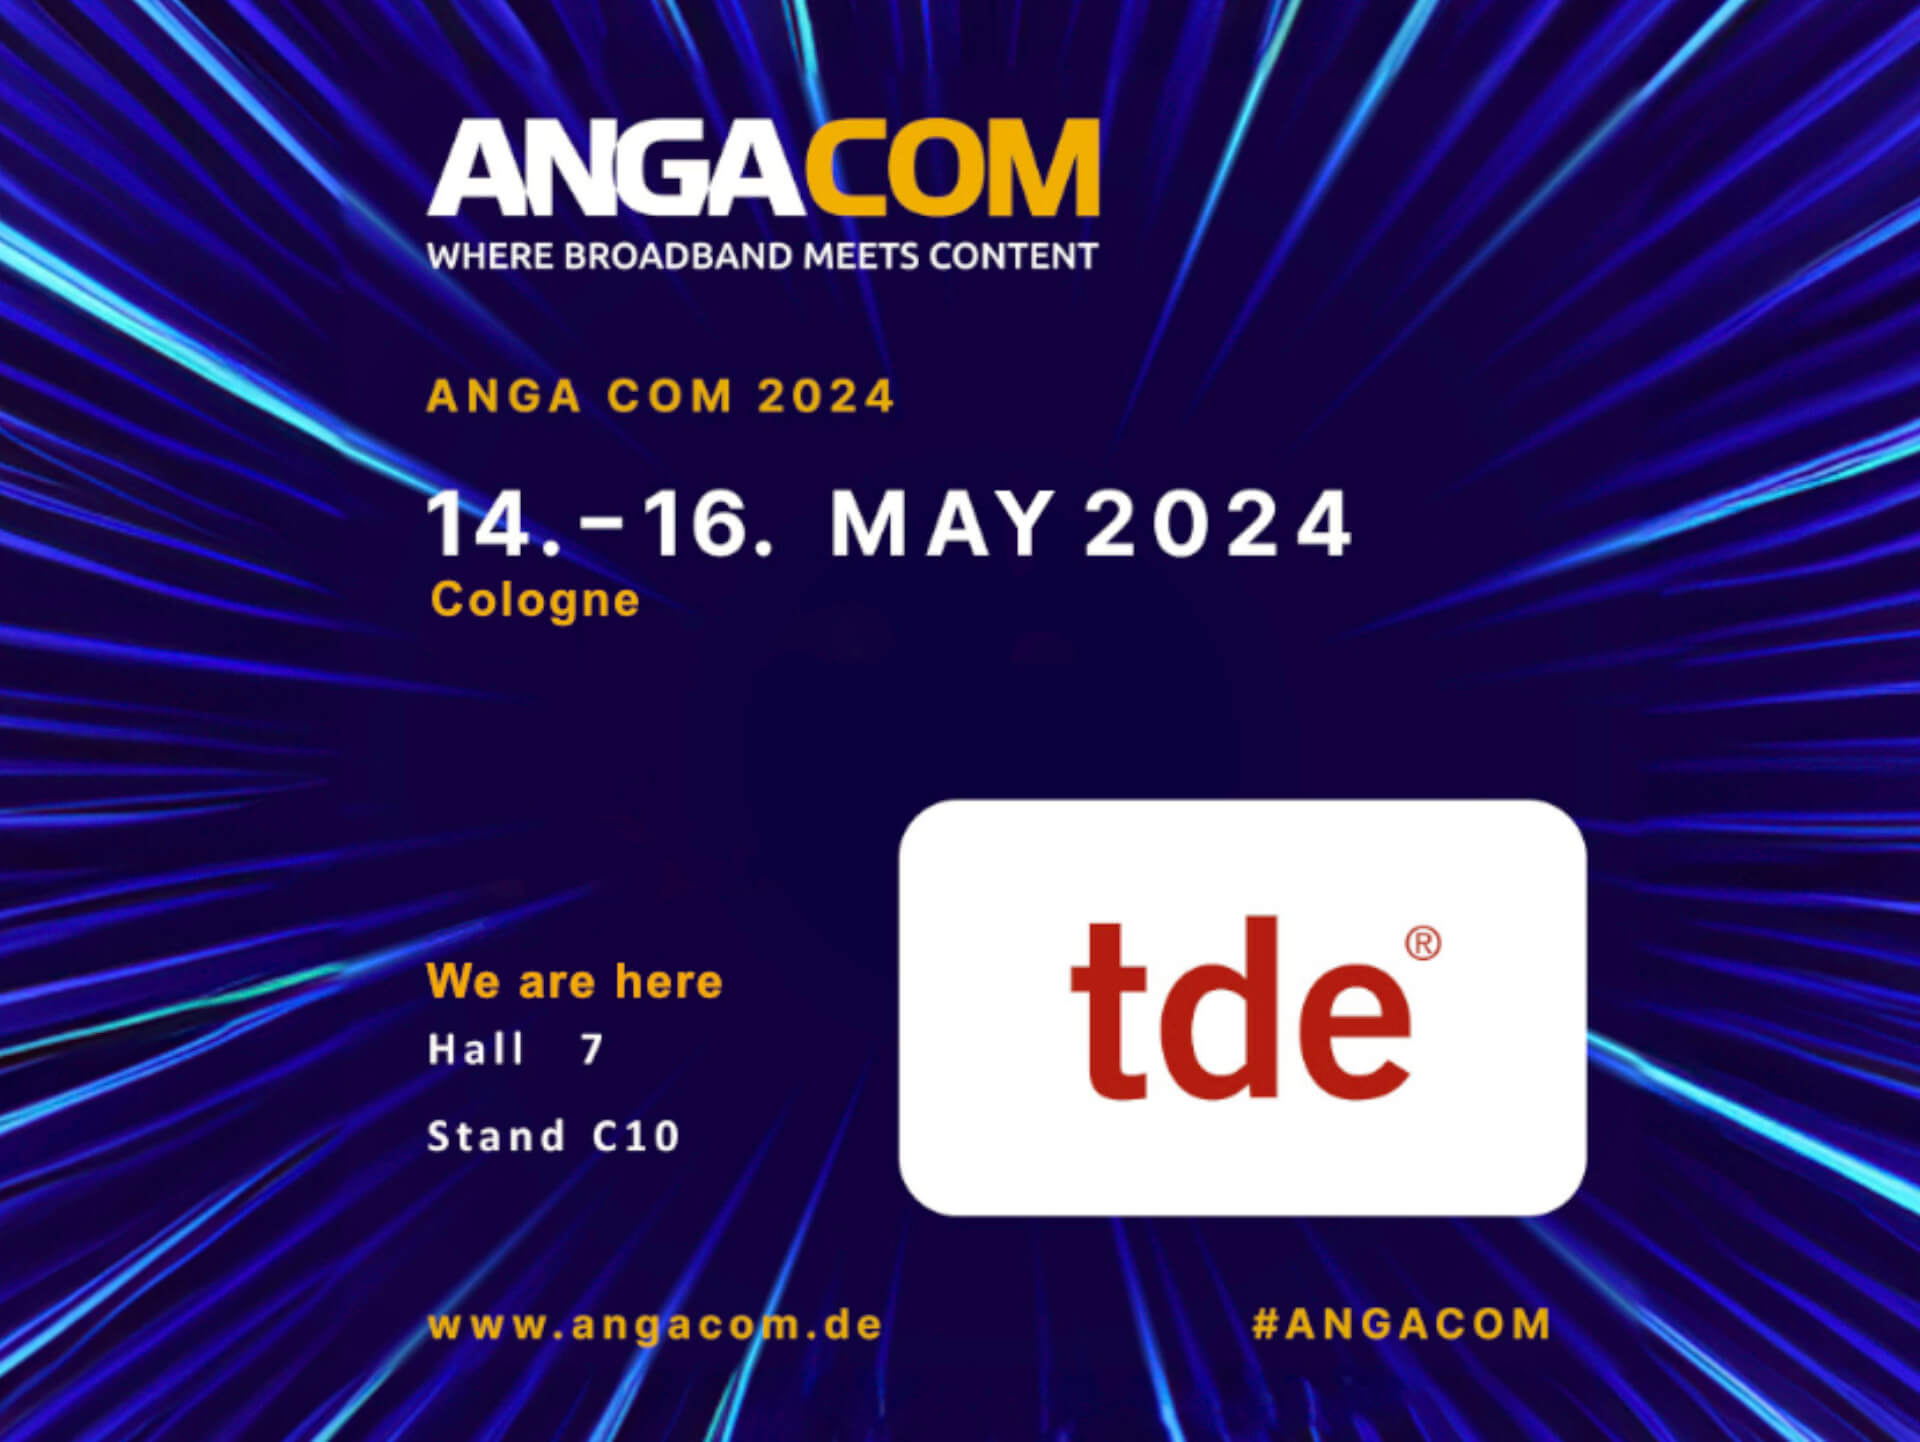 Notice of tde’s participation at trade fair ANGA COM 2024, Cologne, to see: Trade fair and tde logo as word mark, fibre optic cables in turquoise and light blue in the foreground on a dark blue background, announcing 14 to 16 May, stand C10, hall 7.